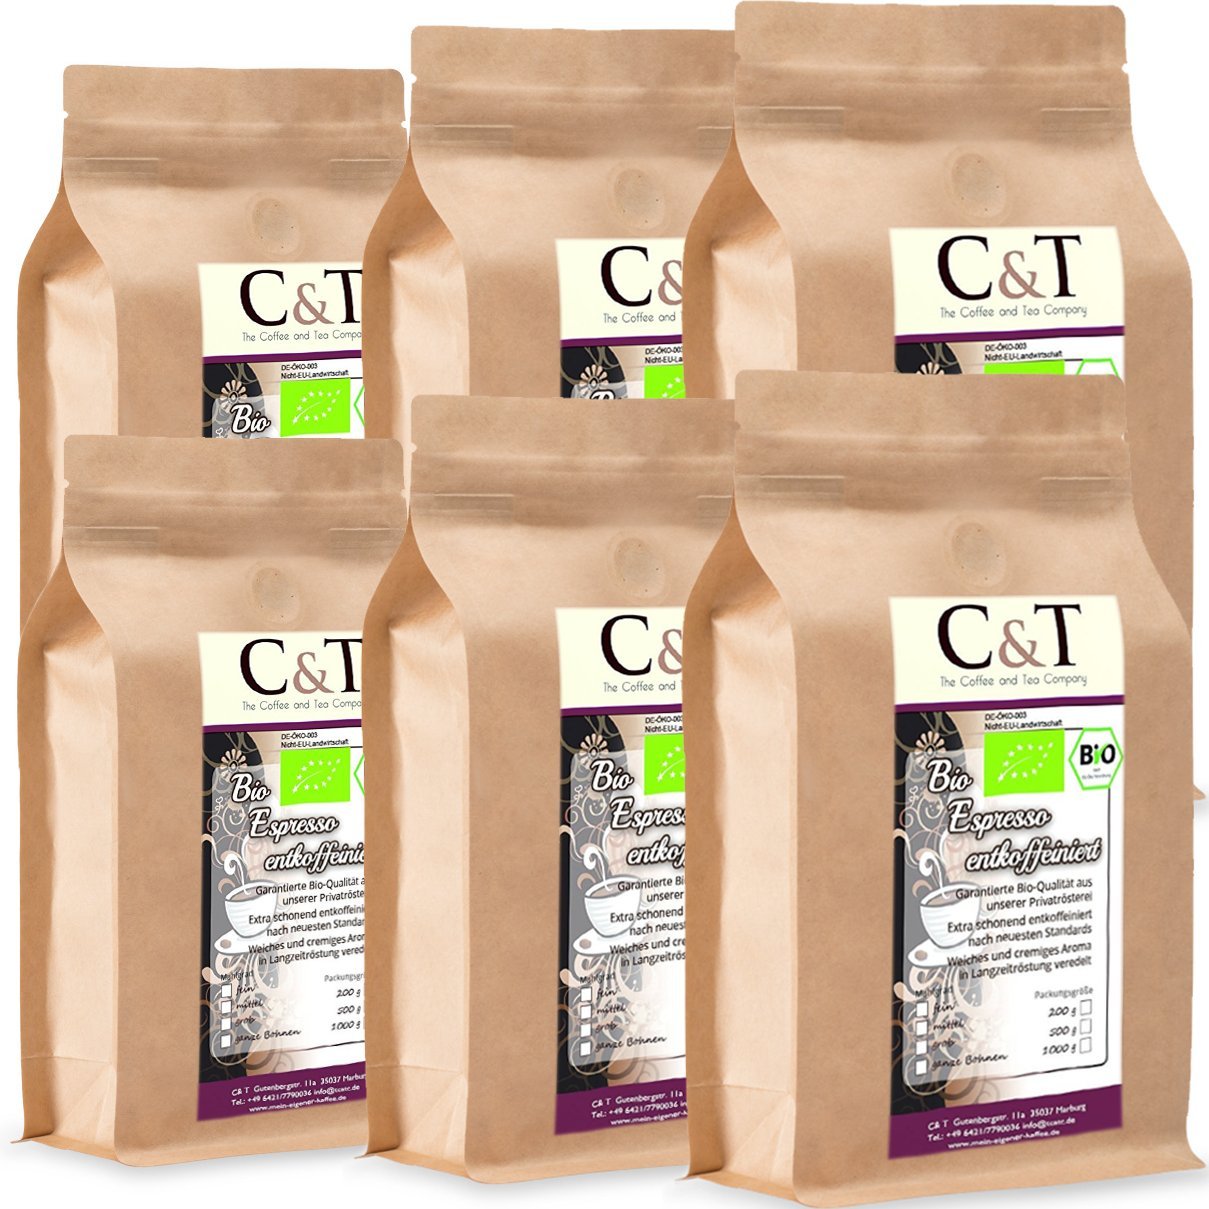 C&T Bio Espresso Crema | Cafe decaffeinated 100% Arabica 6x1000 g Whole beans (including free coffee bag) savings pack in the power paper bag